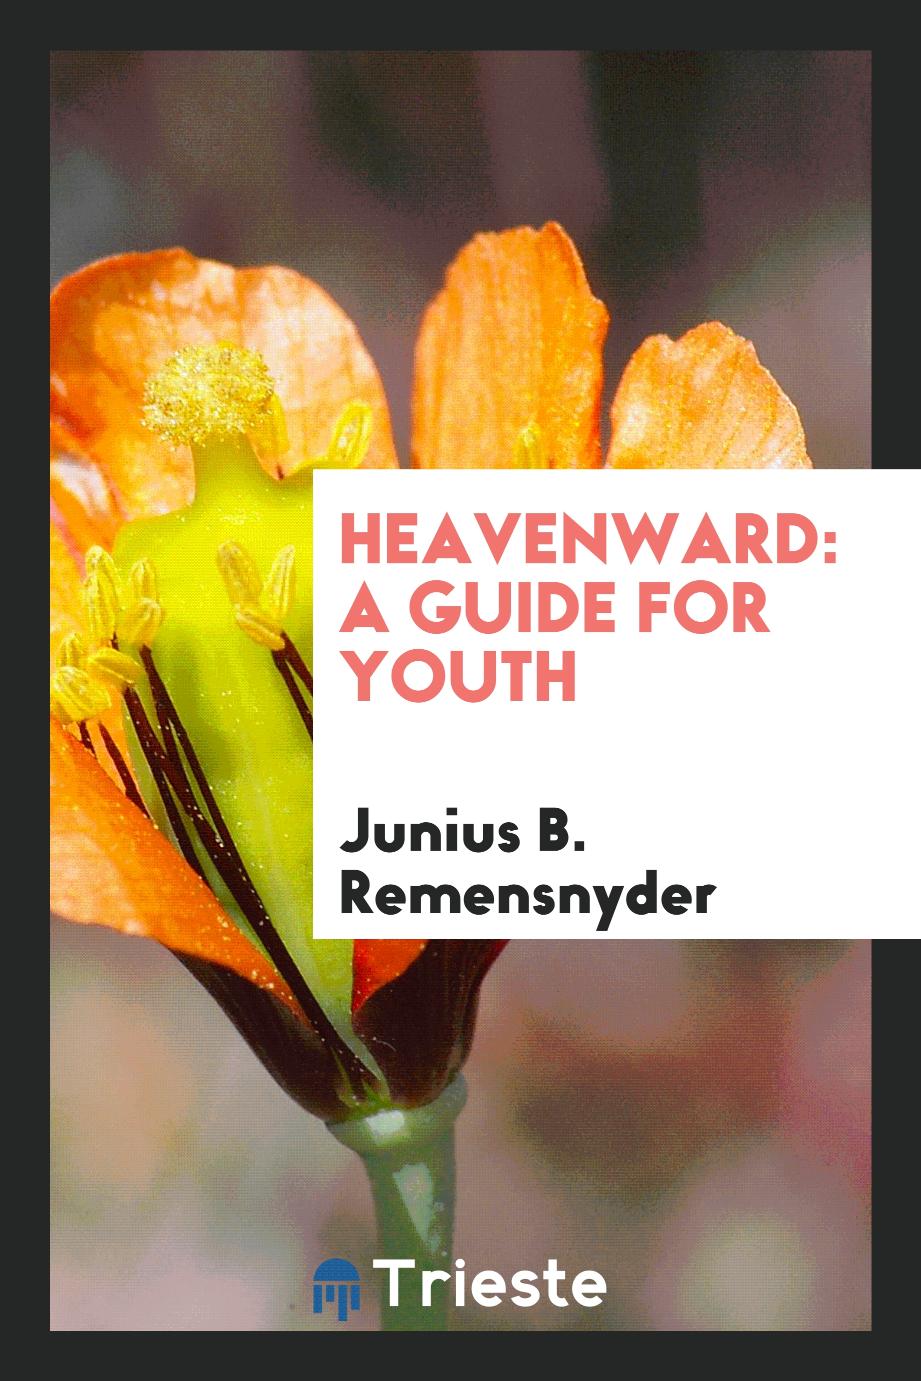 Heavenward: A Guide for Youth